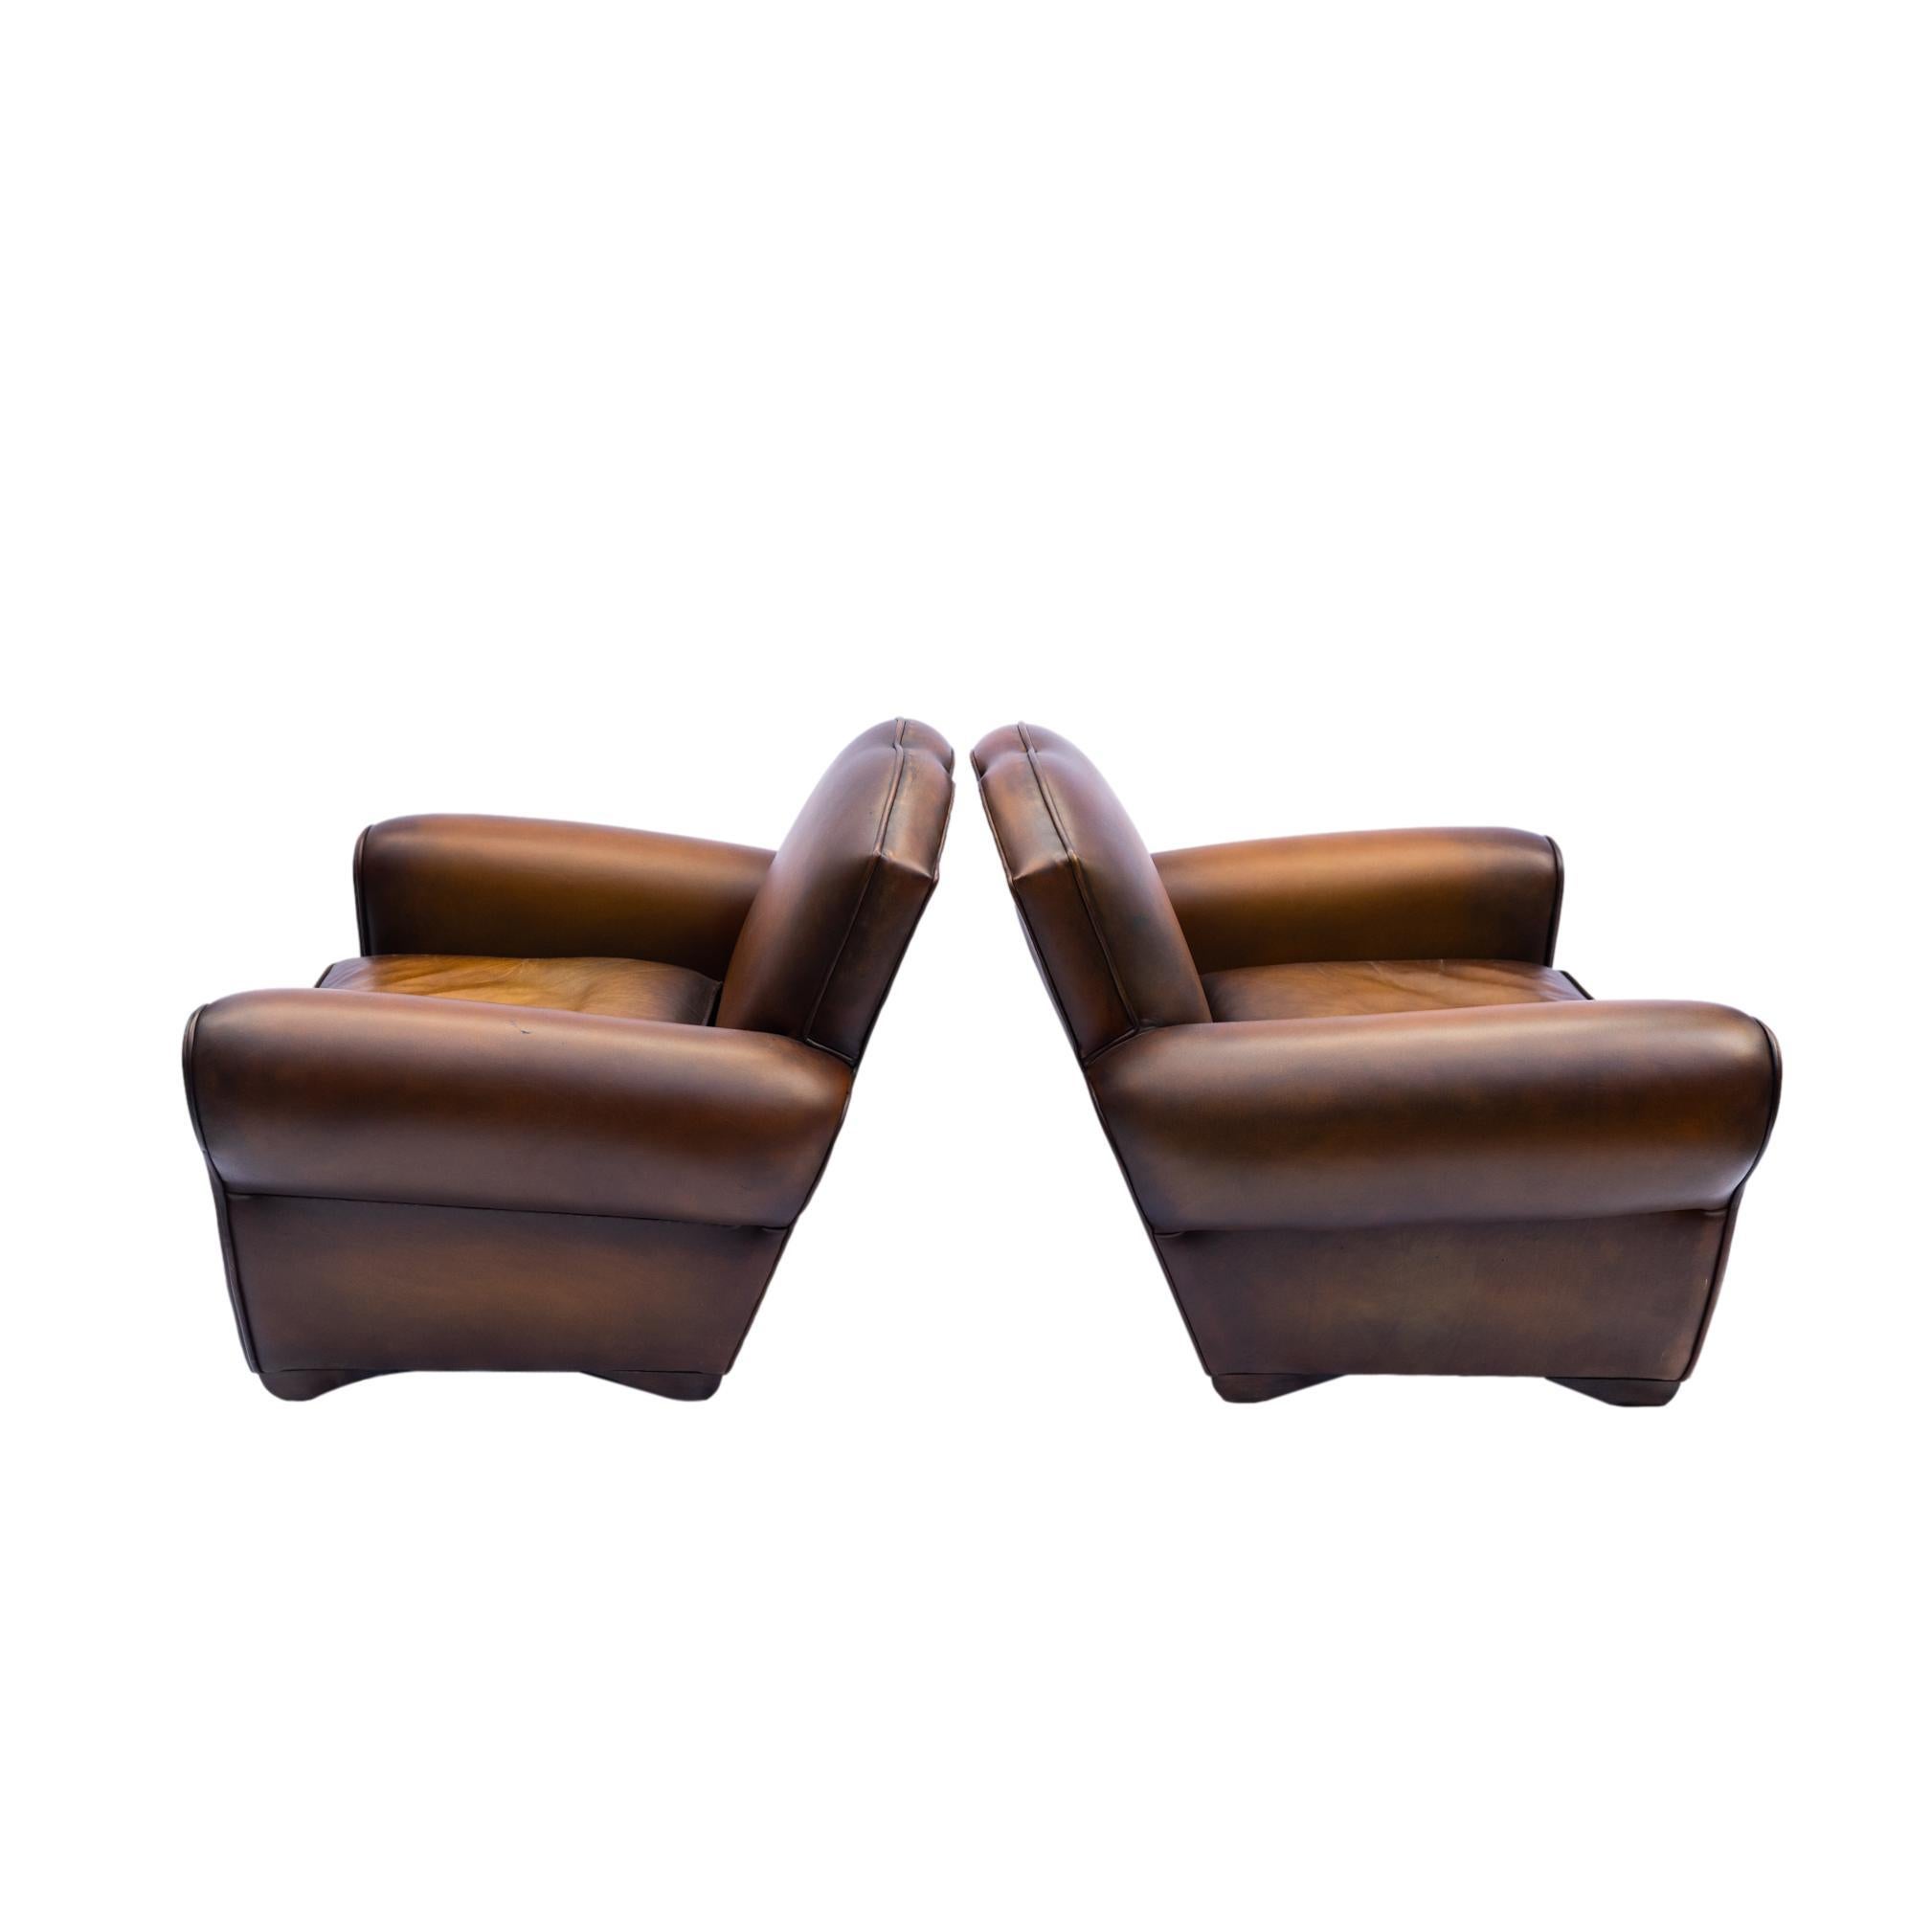 Pair of Art Deco Leather Club Chairs with Mustache Backs, French, ca. 1935 2